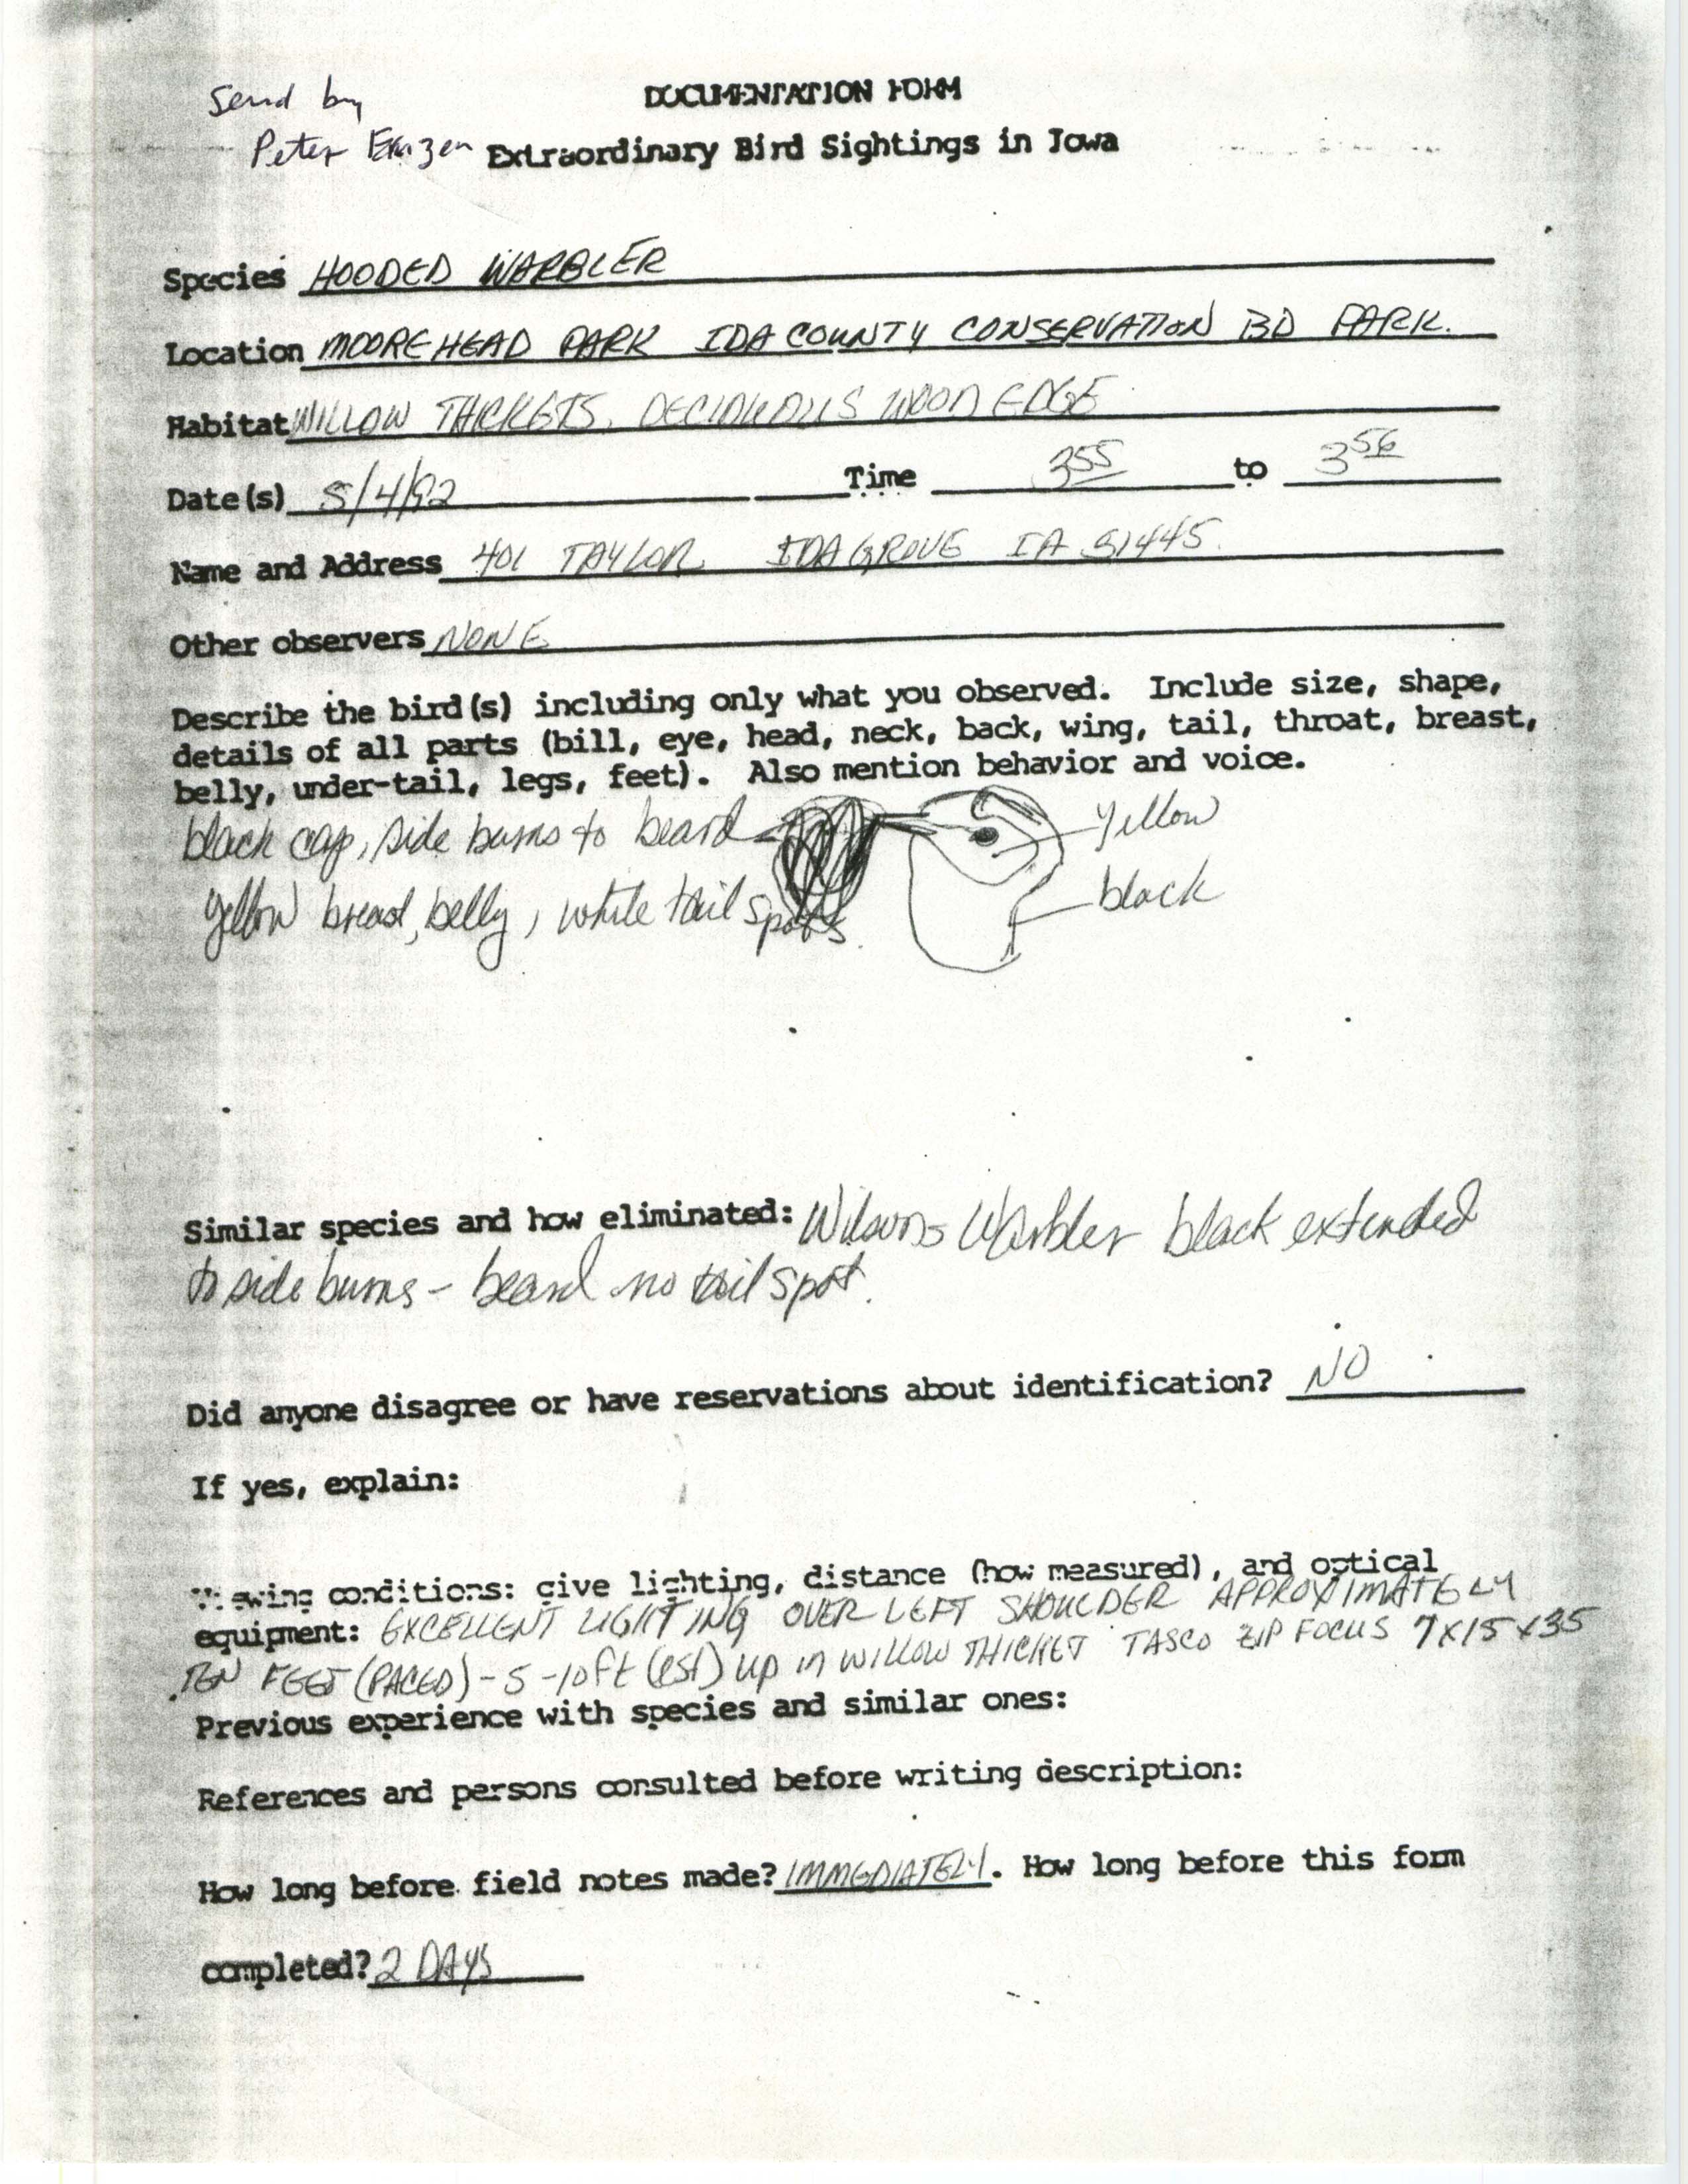 Rare bird documentation form for Hooded Warbler at Moorehead Park in 1992